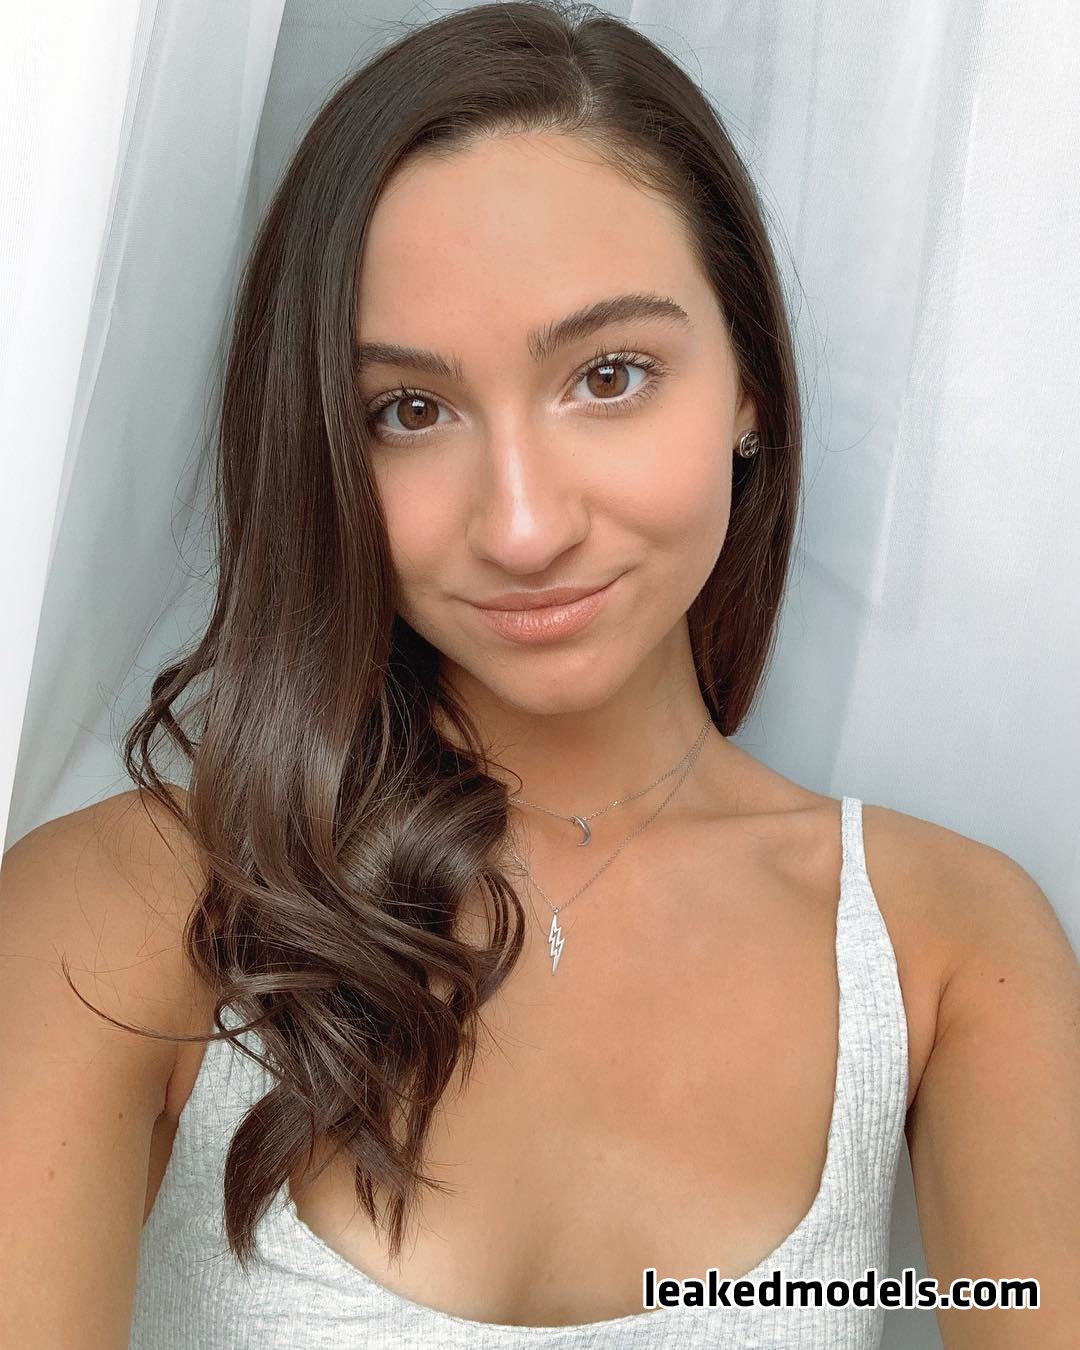 christina marie harris   beautychickee leaked nude leakedmodels.com 0011 - Christina Marie Harris – beautychickee OnlyFans Sexy Leaks (45 Photos)